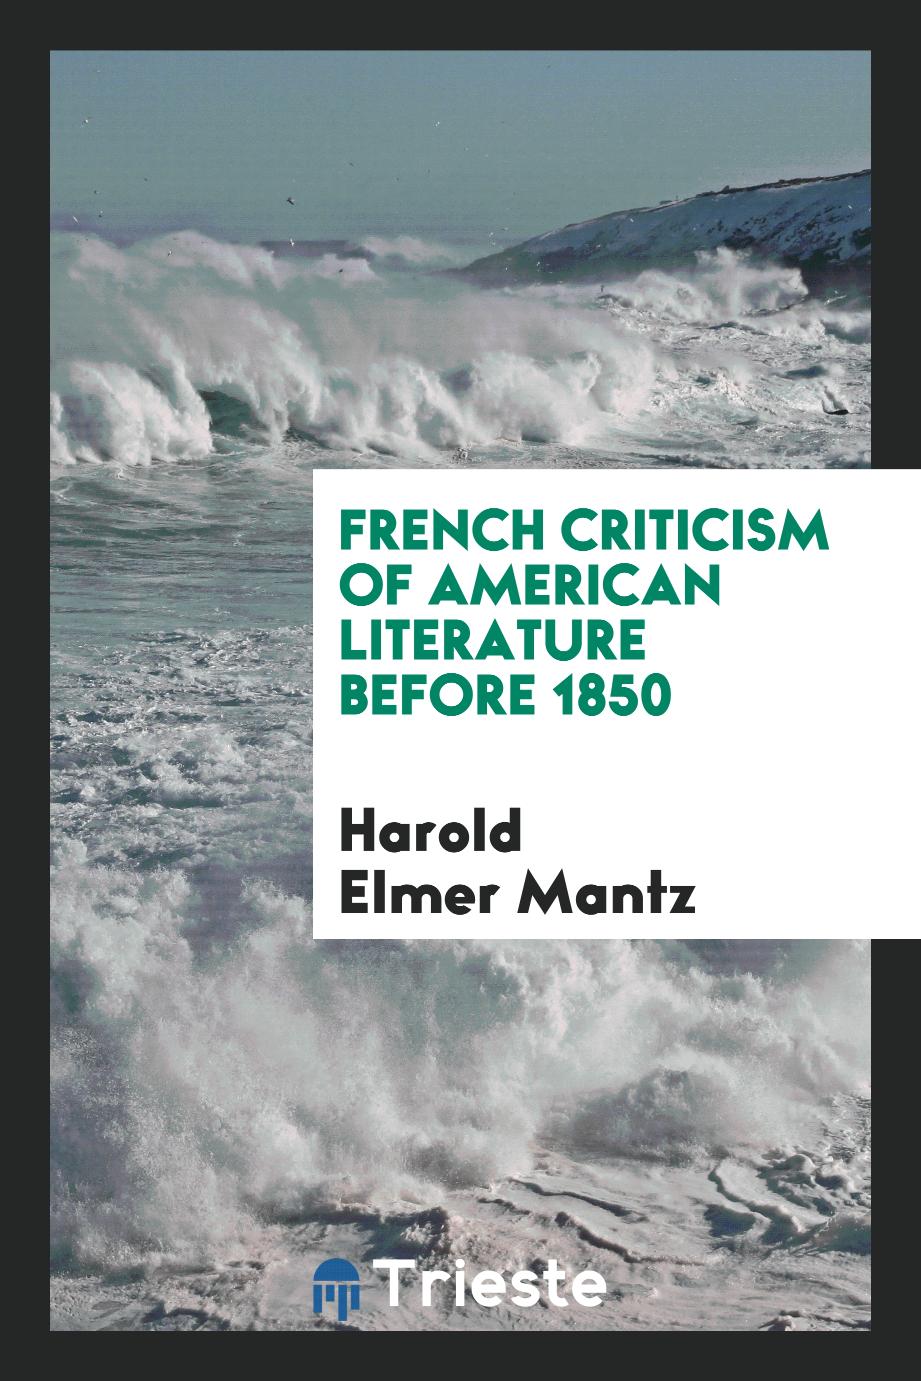 French Criticism of American Literature Before 1850